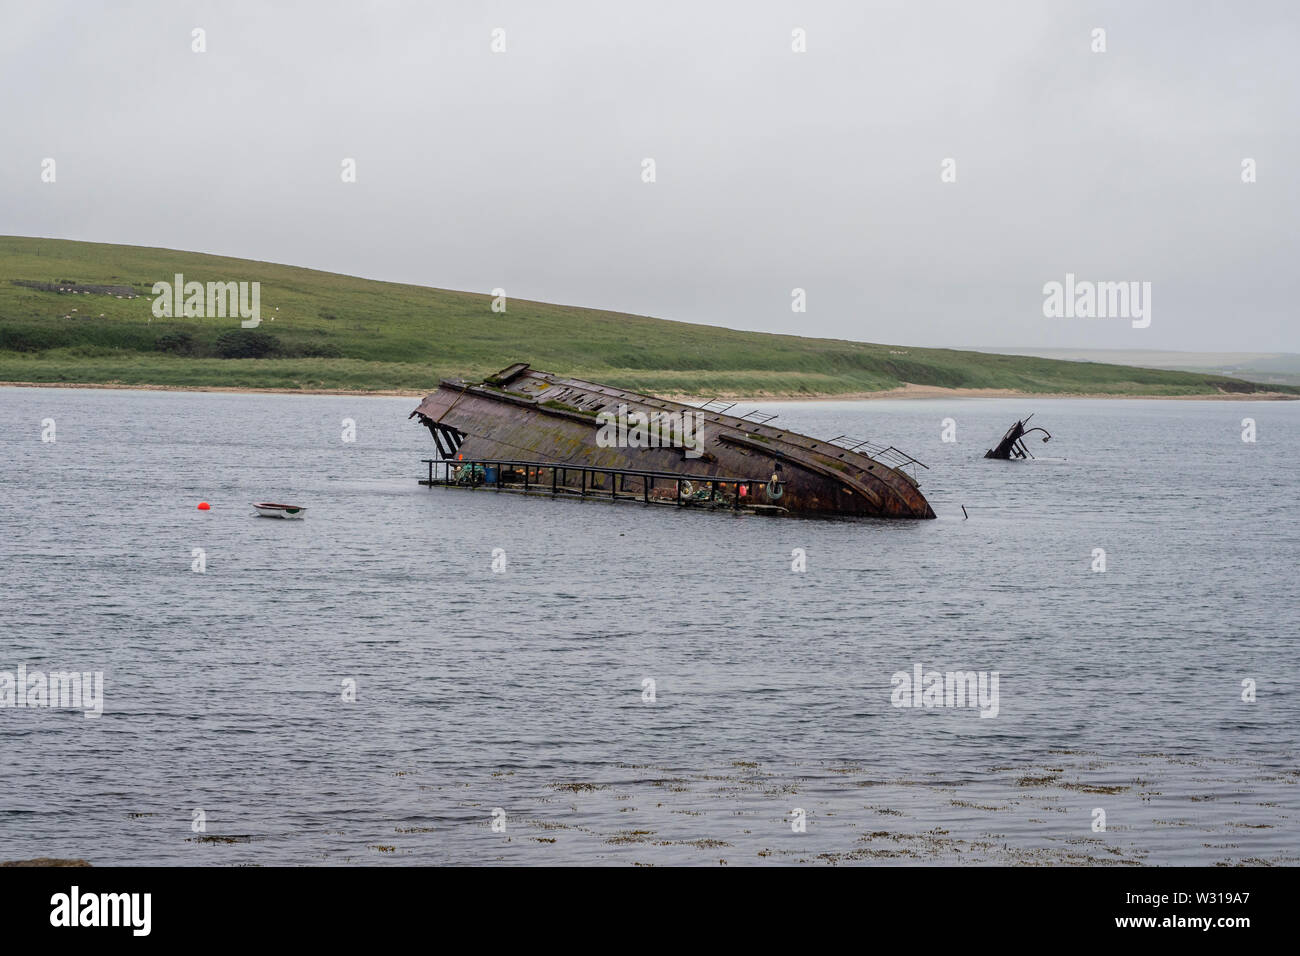 Scapa Flow is a body of water in the Orkney Islands, Scotland, sheltered by the islands of Mainland, Graemsay, Burray, South Ronaldsay and Hoy. Stock Photo